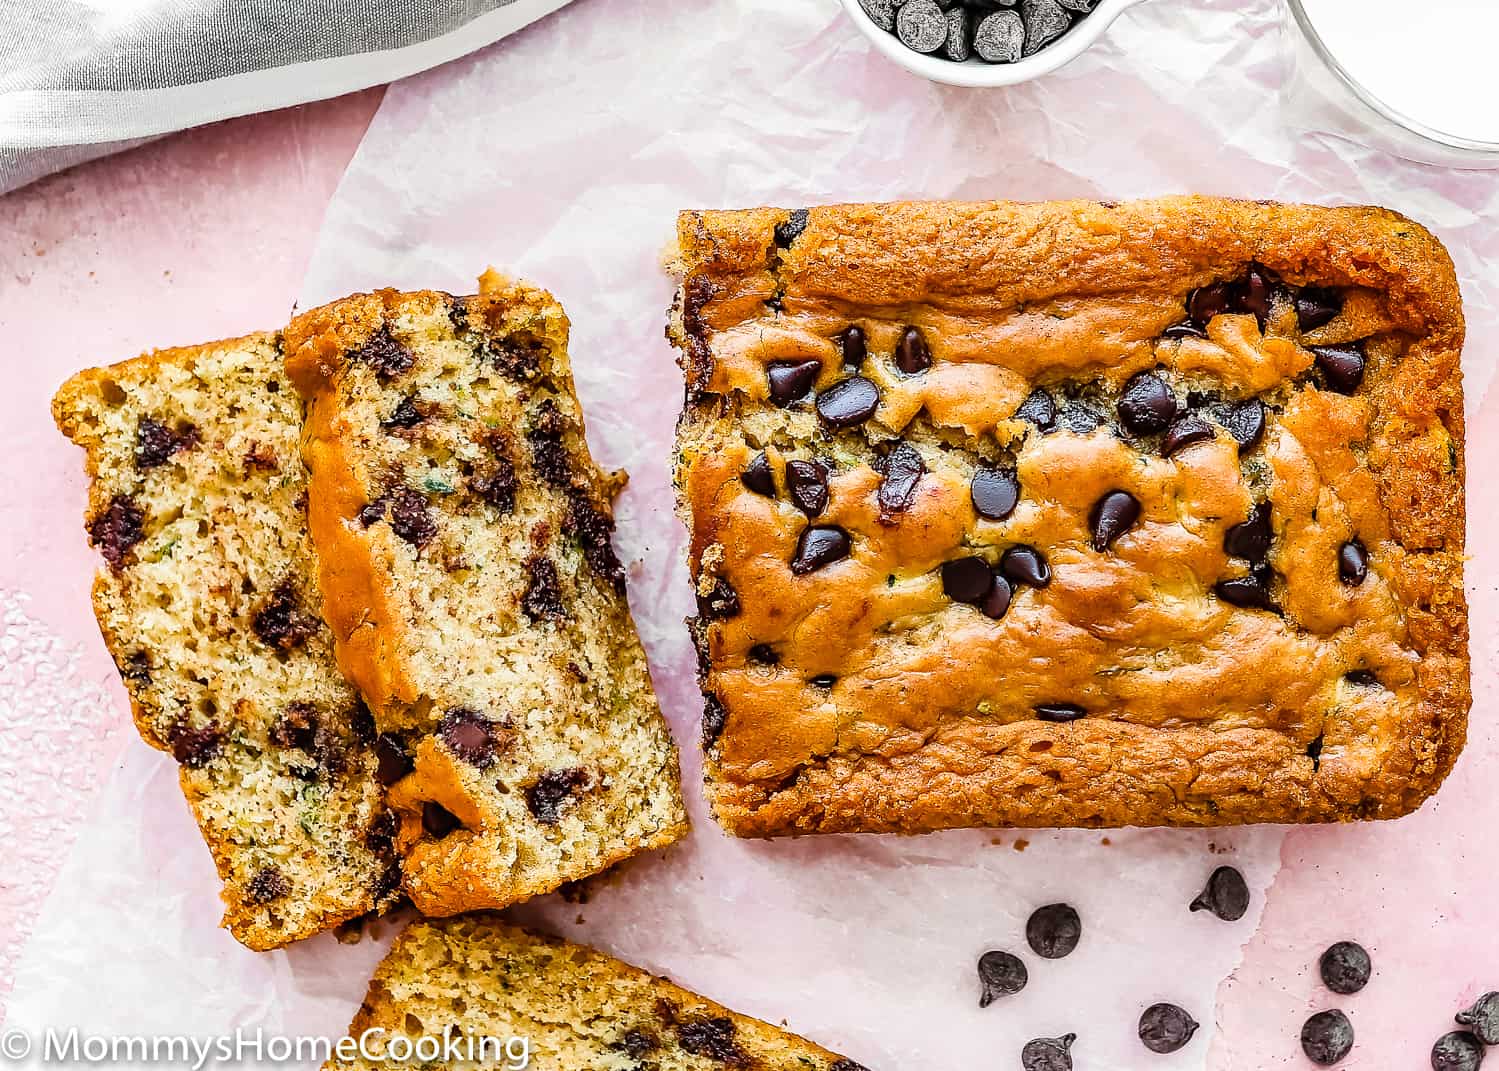 sliced eggless Eggless Zucchini Bread with chocolate chips on top.